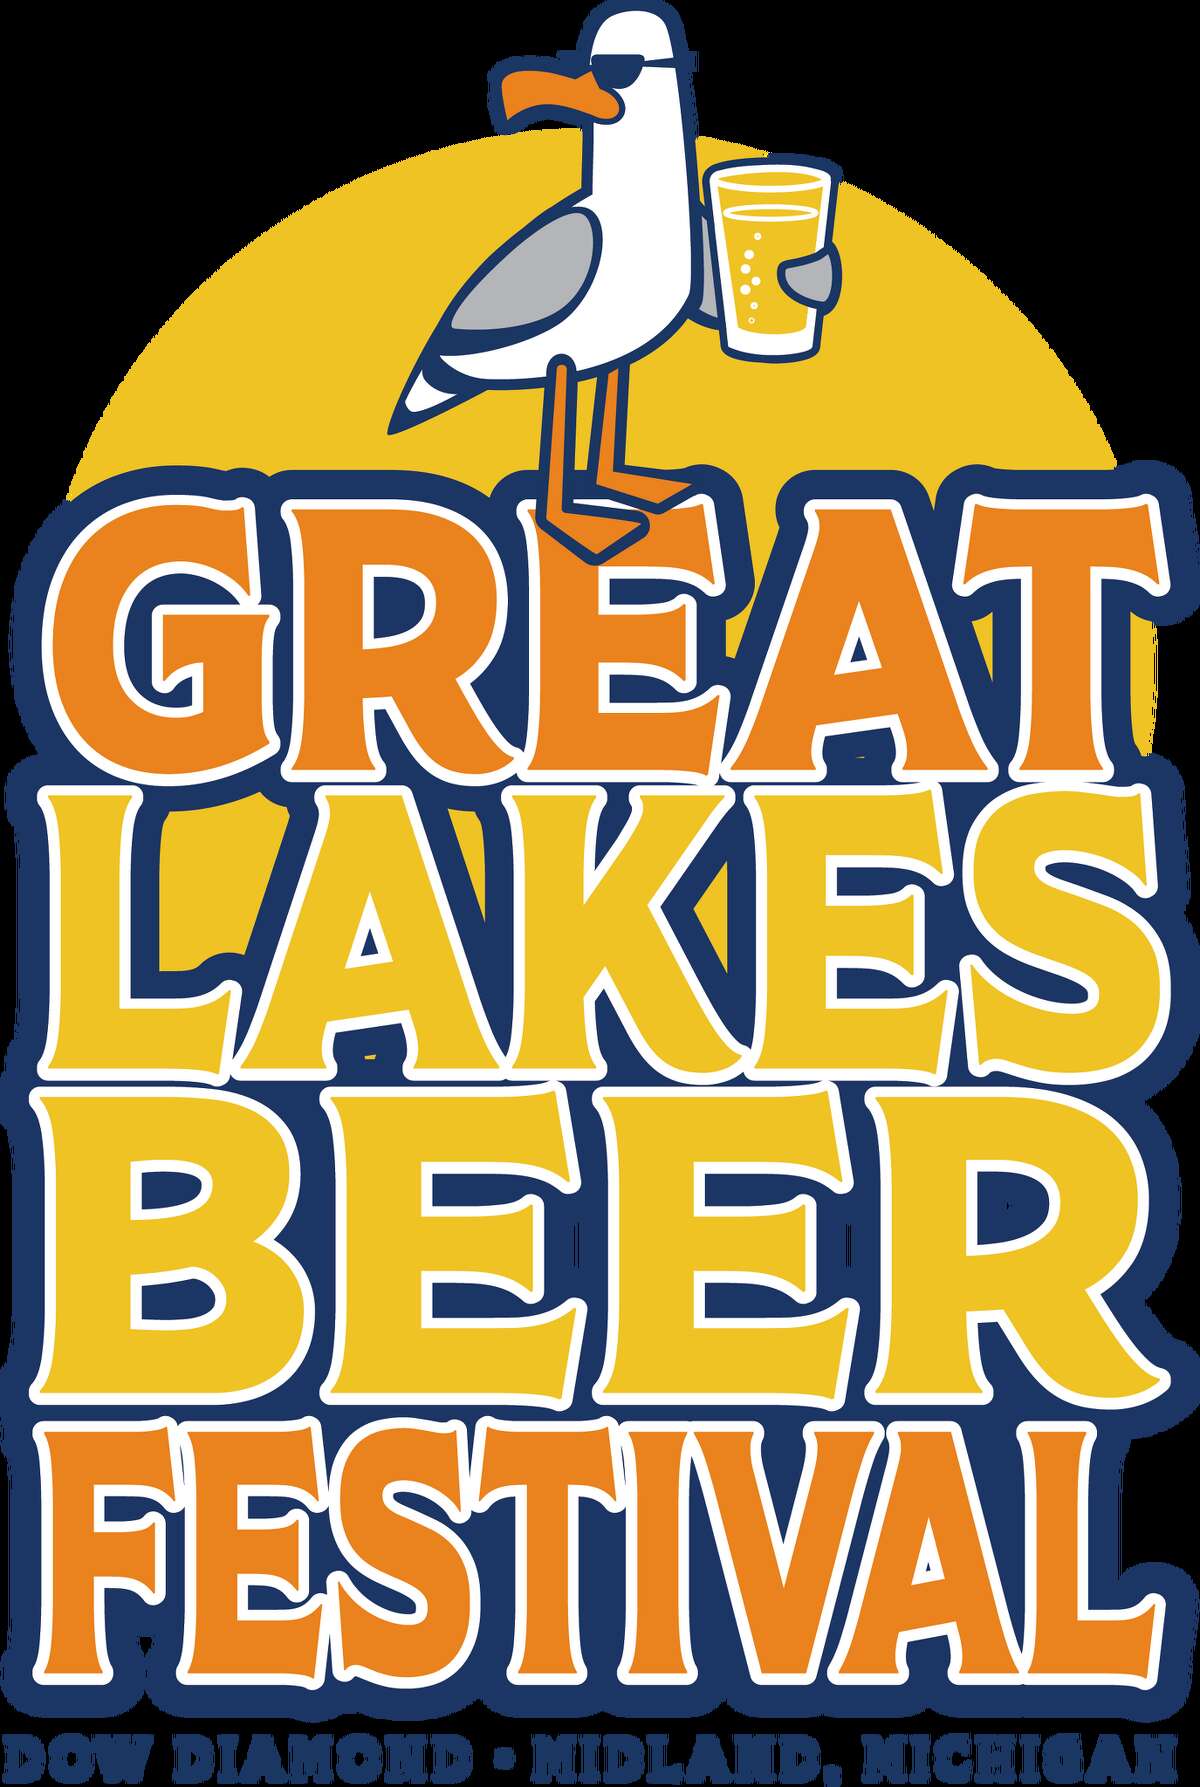 Dow Diamond, home of Los Angeles Dodgers affiliate Great Lakes Loons, will be the site of the Great Lakes Beer Festival, sponsored by Michigan Brew Trail, on Aug. 20. The event features more than 50 Michigan craft breweries serving their specialties inside the stadium.